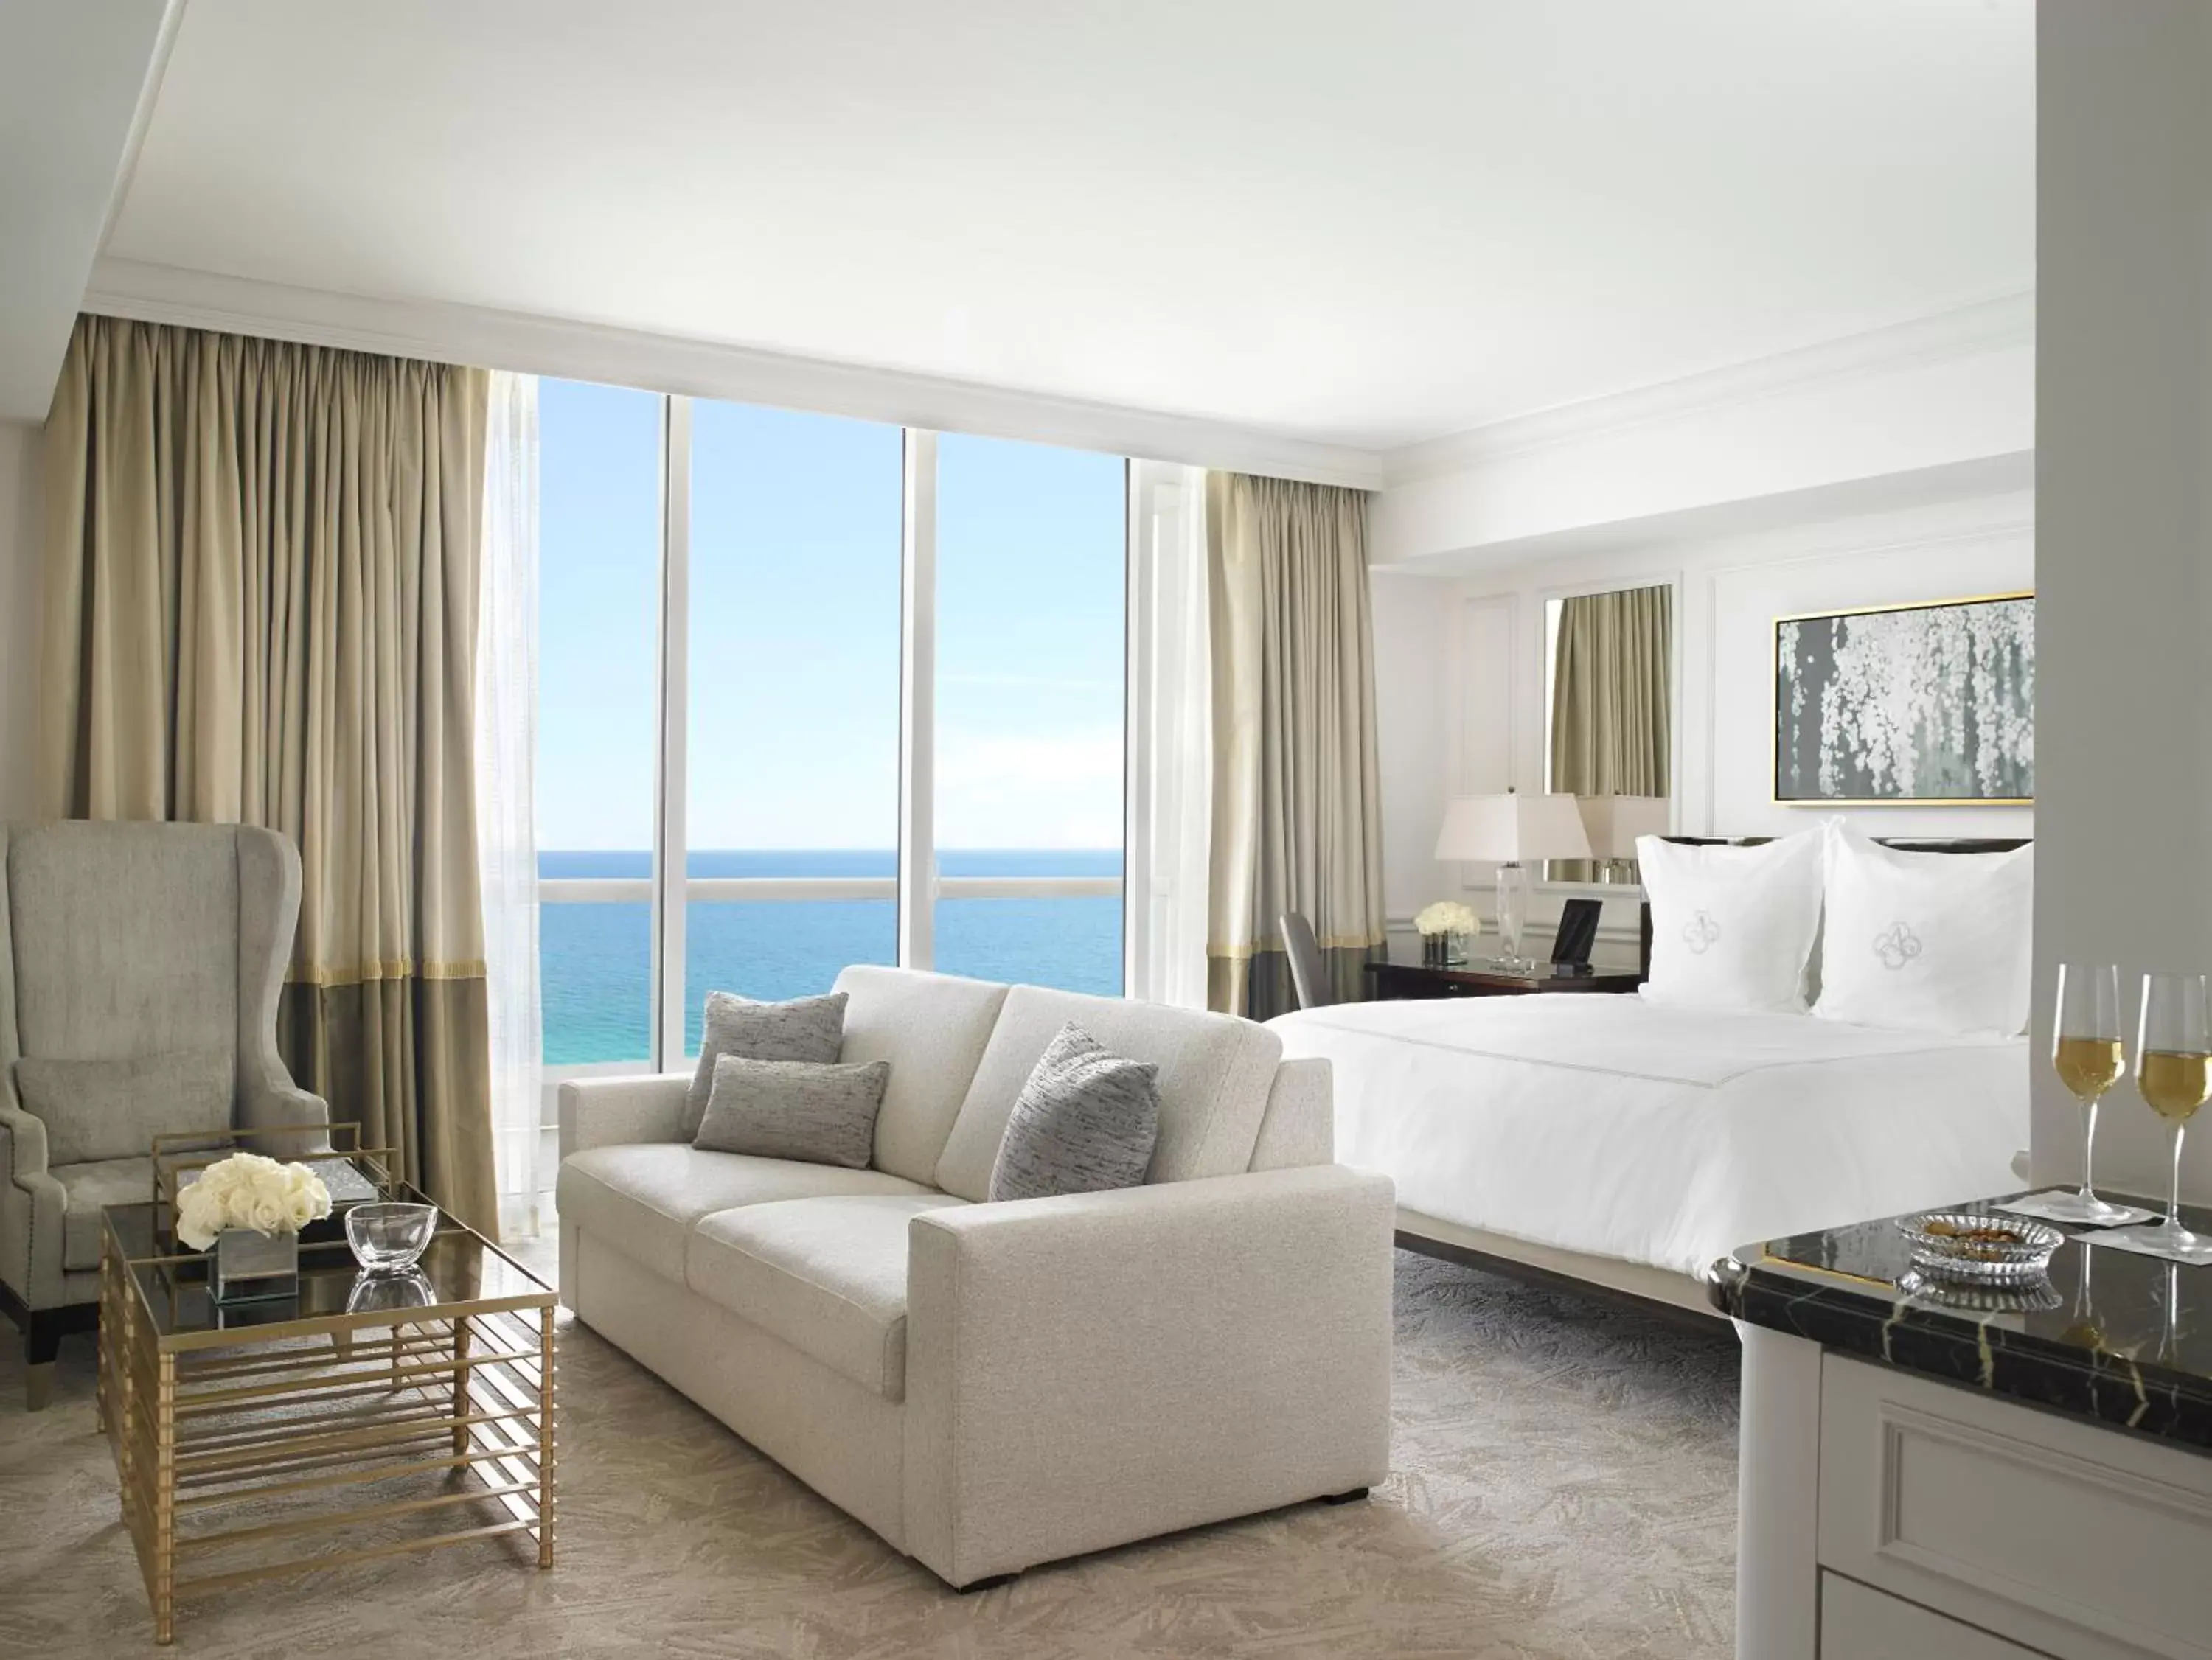 Bed, Sea View in Acqualina Resort and Residences